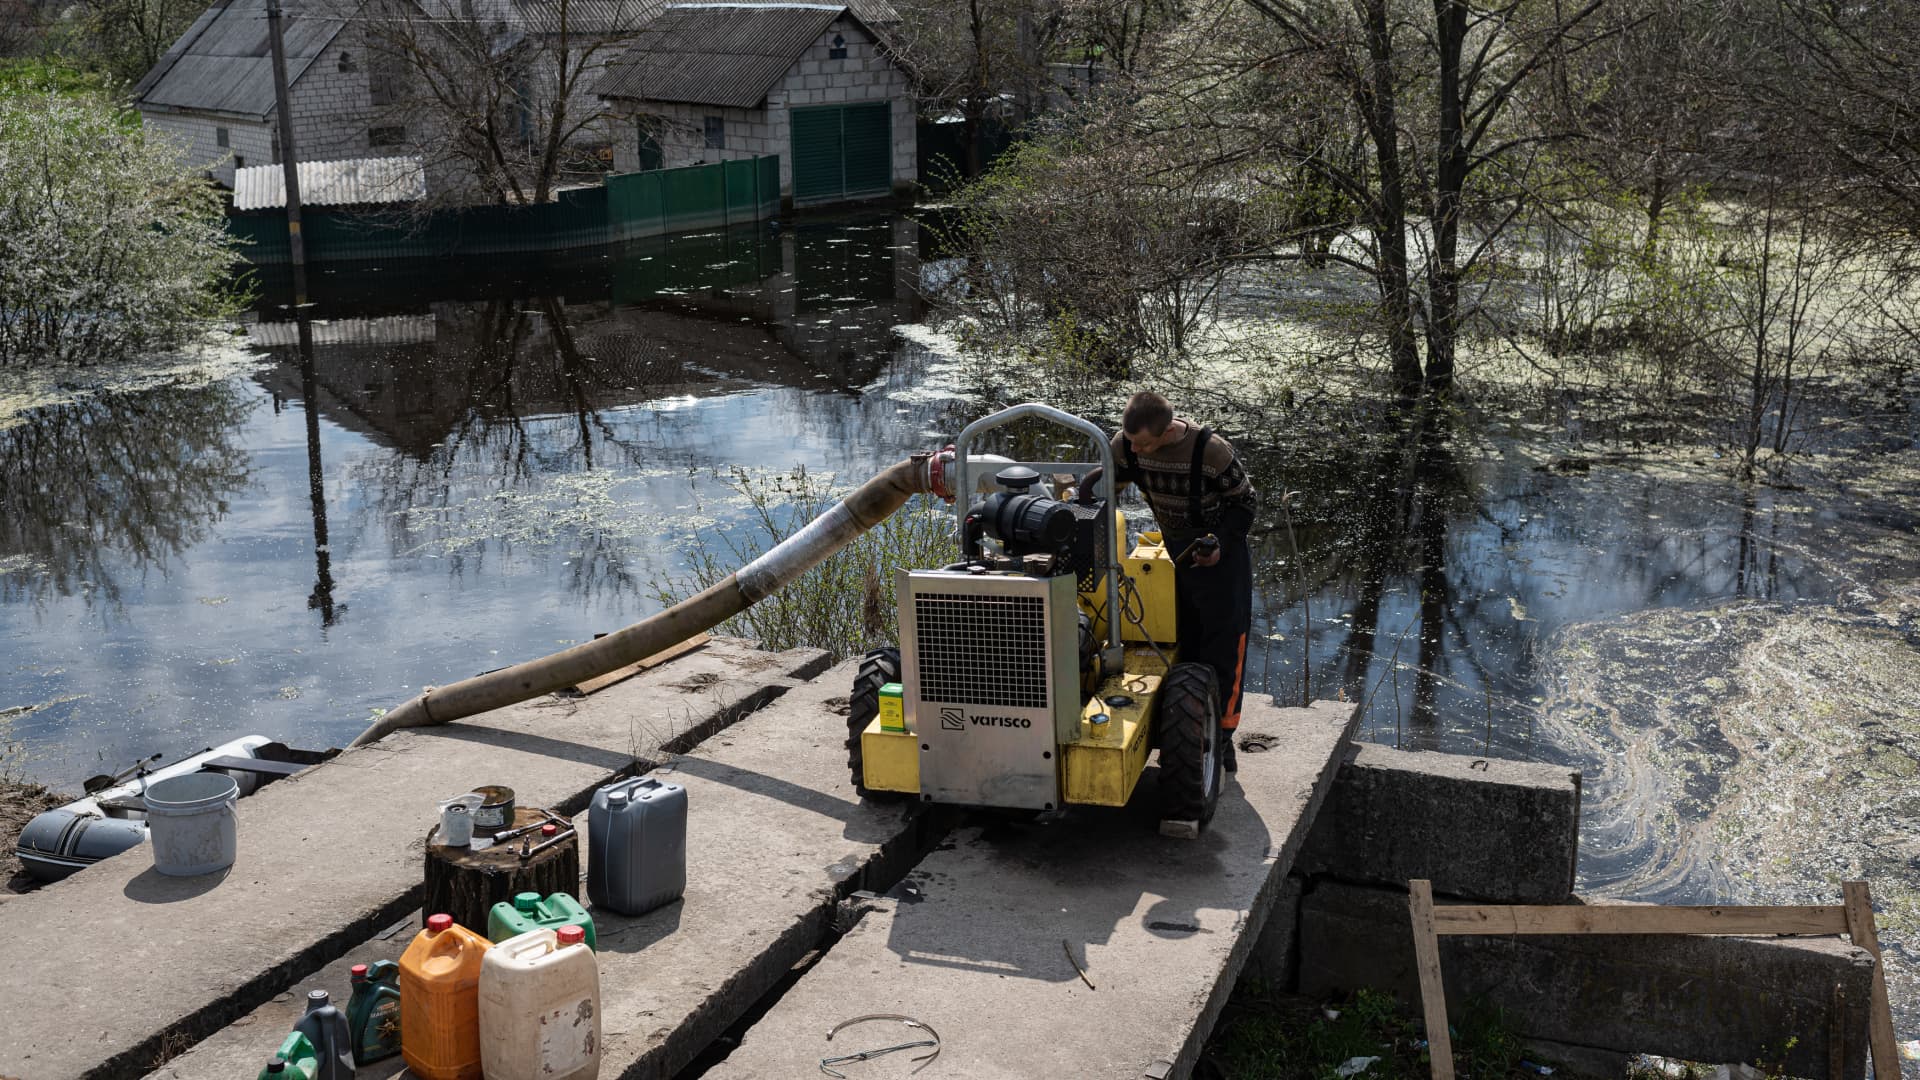 Oleksandr, 39, fixes the pumps he uses to pump out the water from the flooded areas, on May 2, 2022 in Demydiv, Ukraine. T